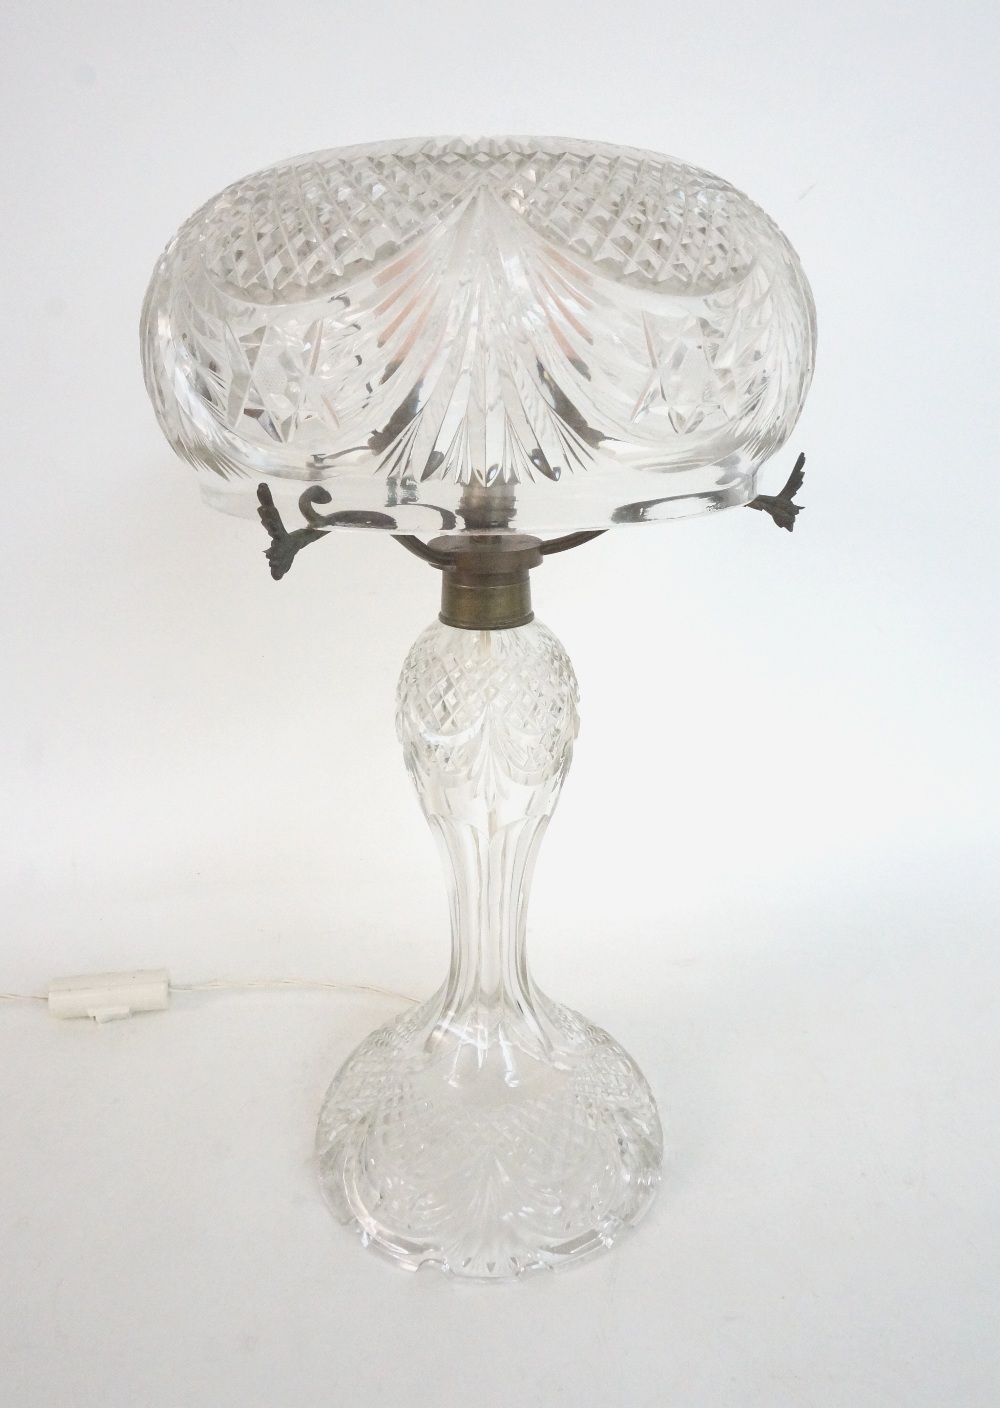 LARGE CRYSTAL MUSHROOM SHAPED TABLE LAMP
with hobnail decoration, 47cm high